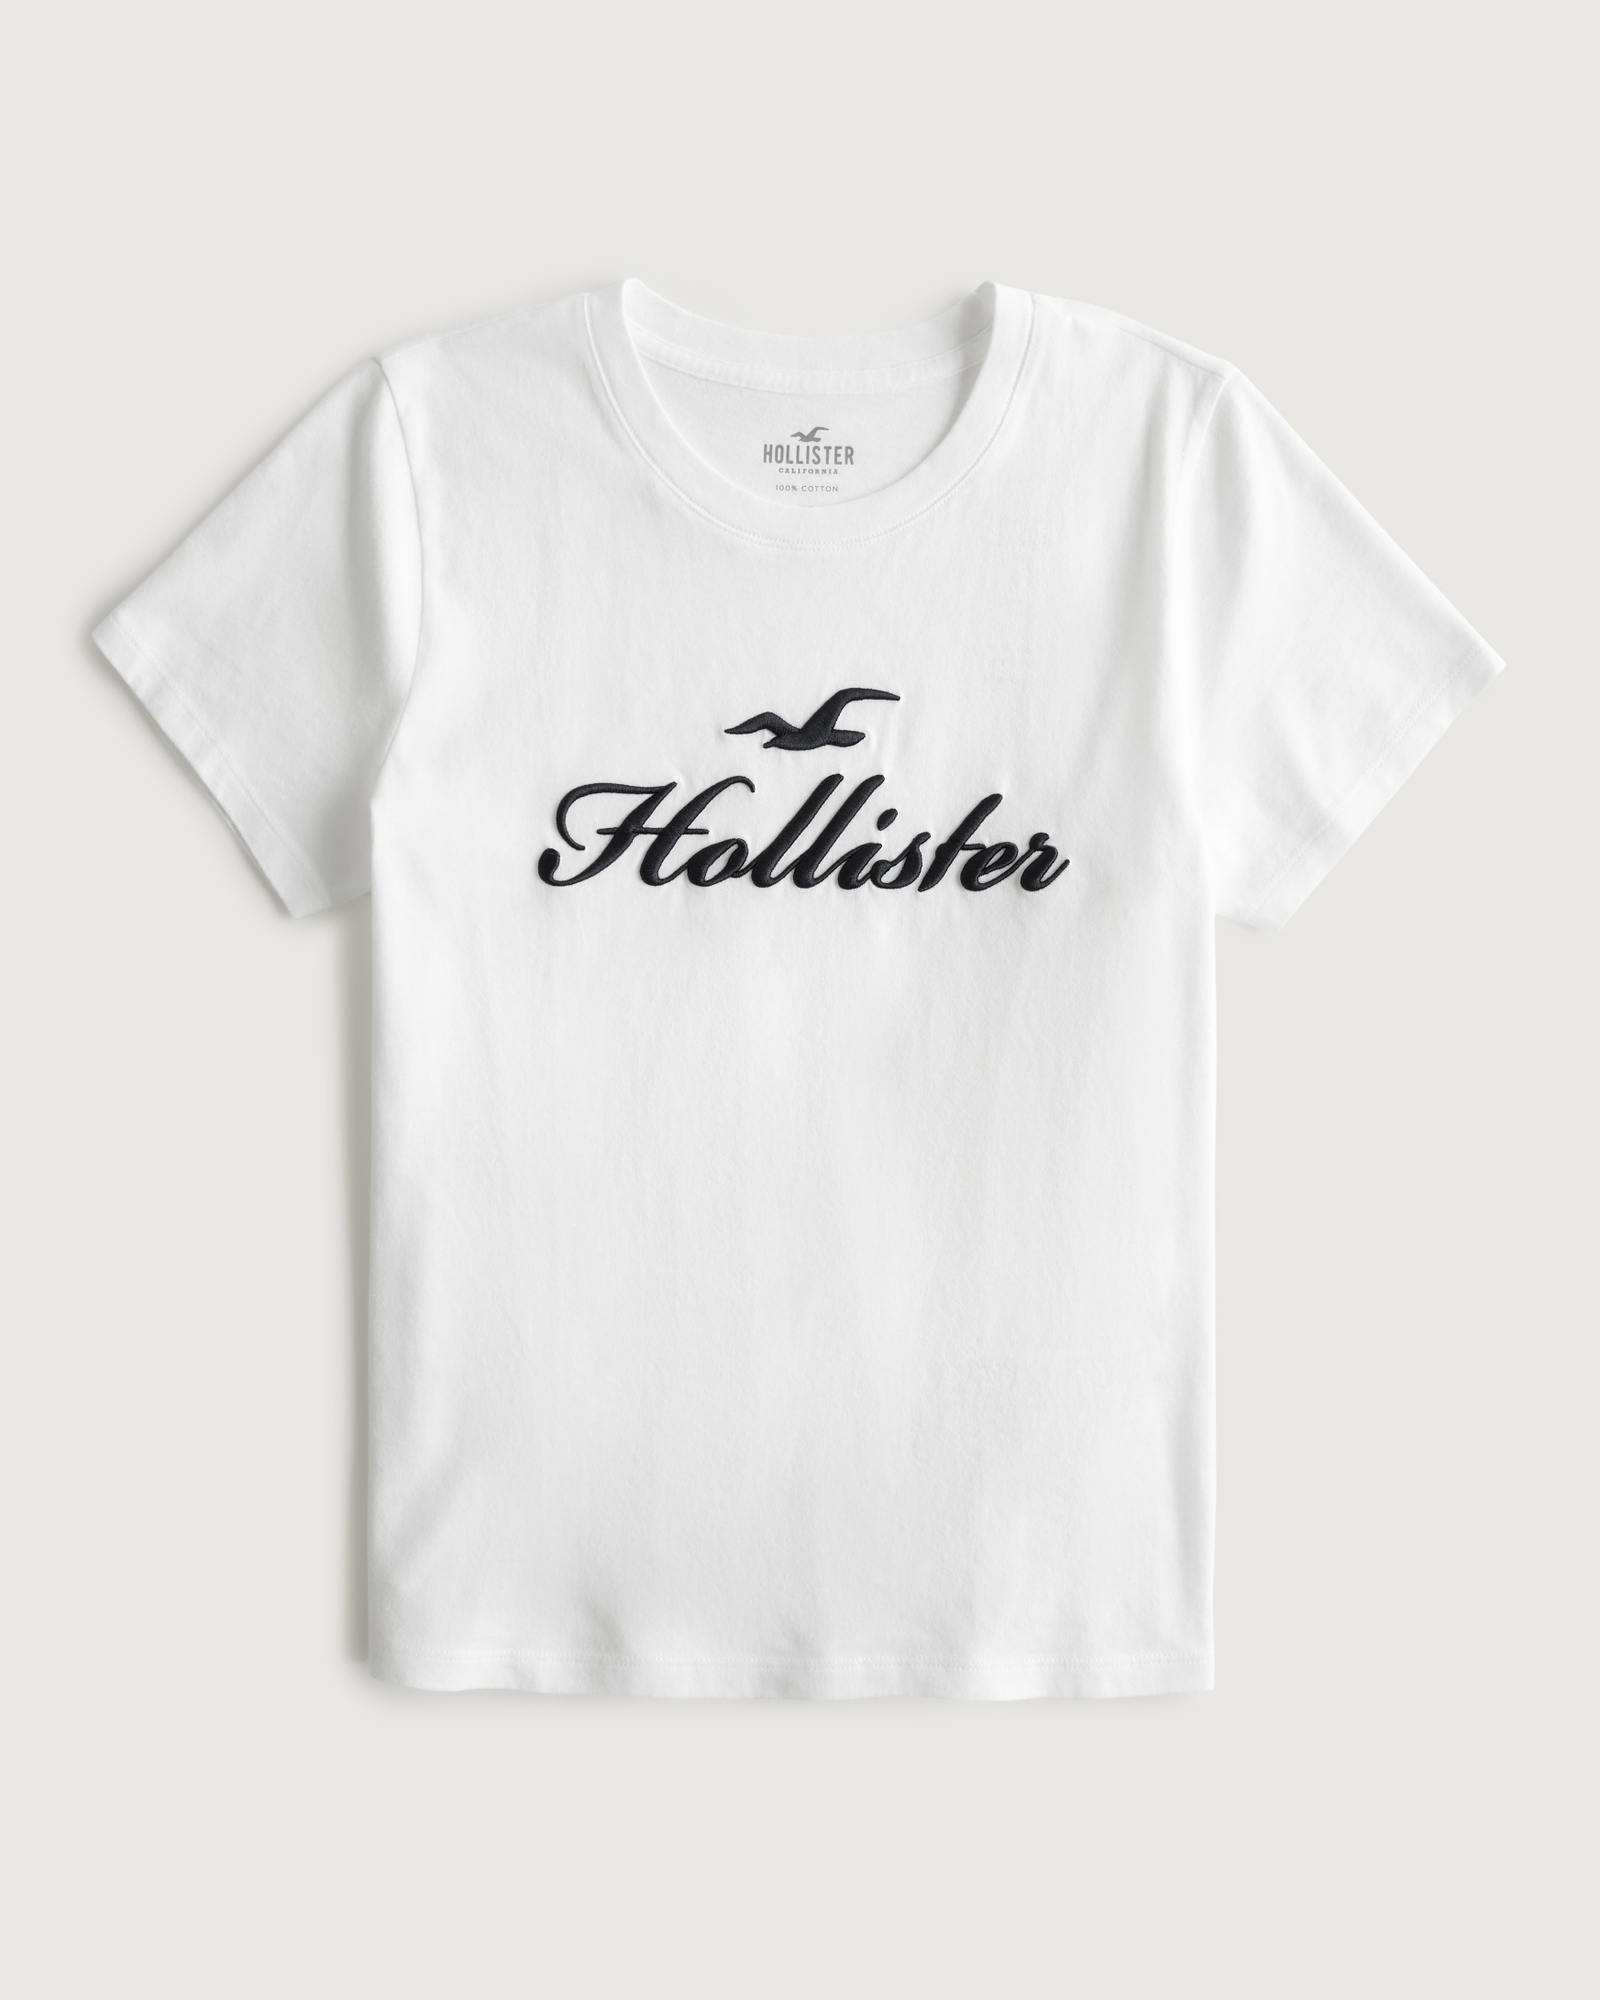 https://img.hollisterco.com/is/image/anf/KIC_357-3098-0925-100_prod1.jpg?policy=product-extra-large